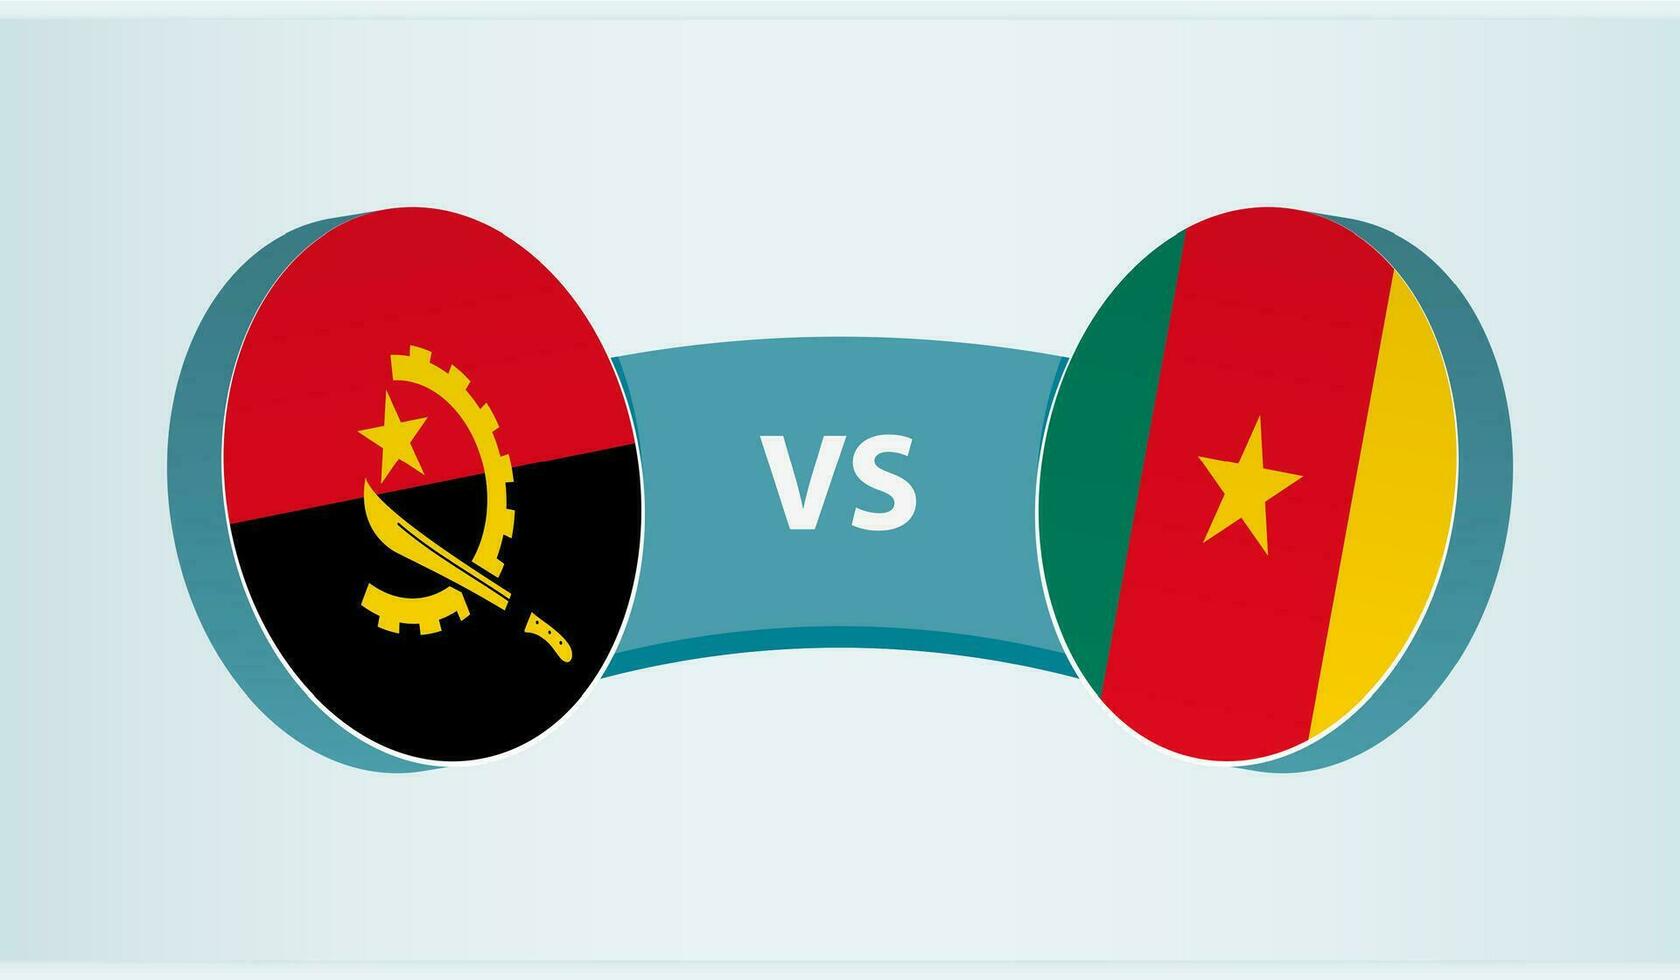 Angola versus Cameroon, team sports competition concept. vector